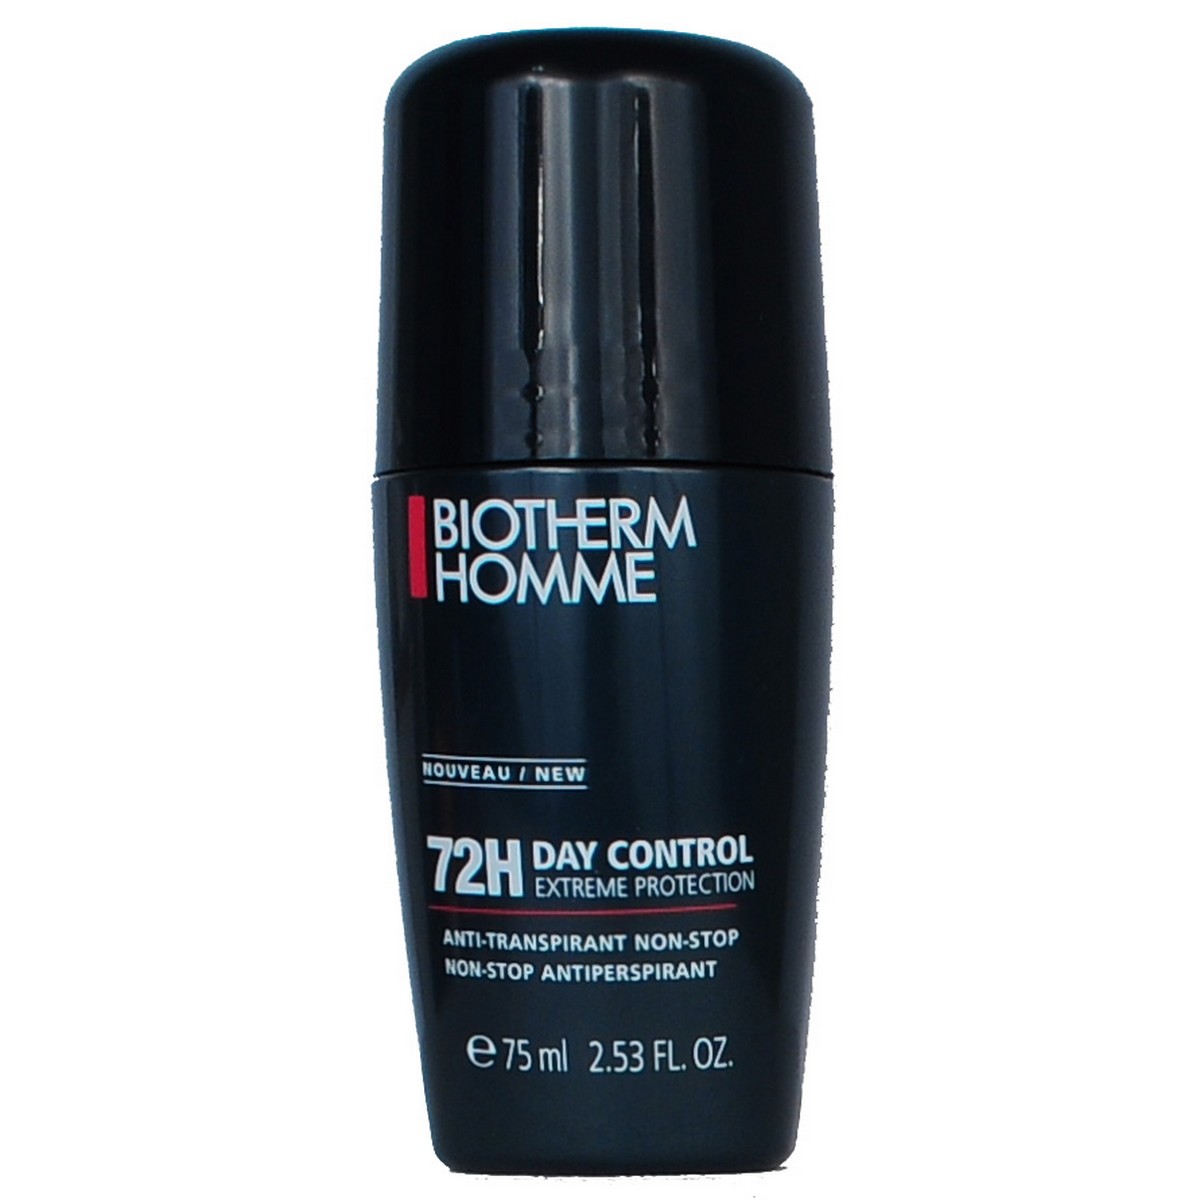 Biotherm Homme Day Control Roll-On Anti-Transpirant 72h 75ml